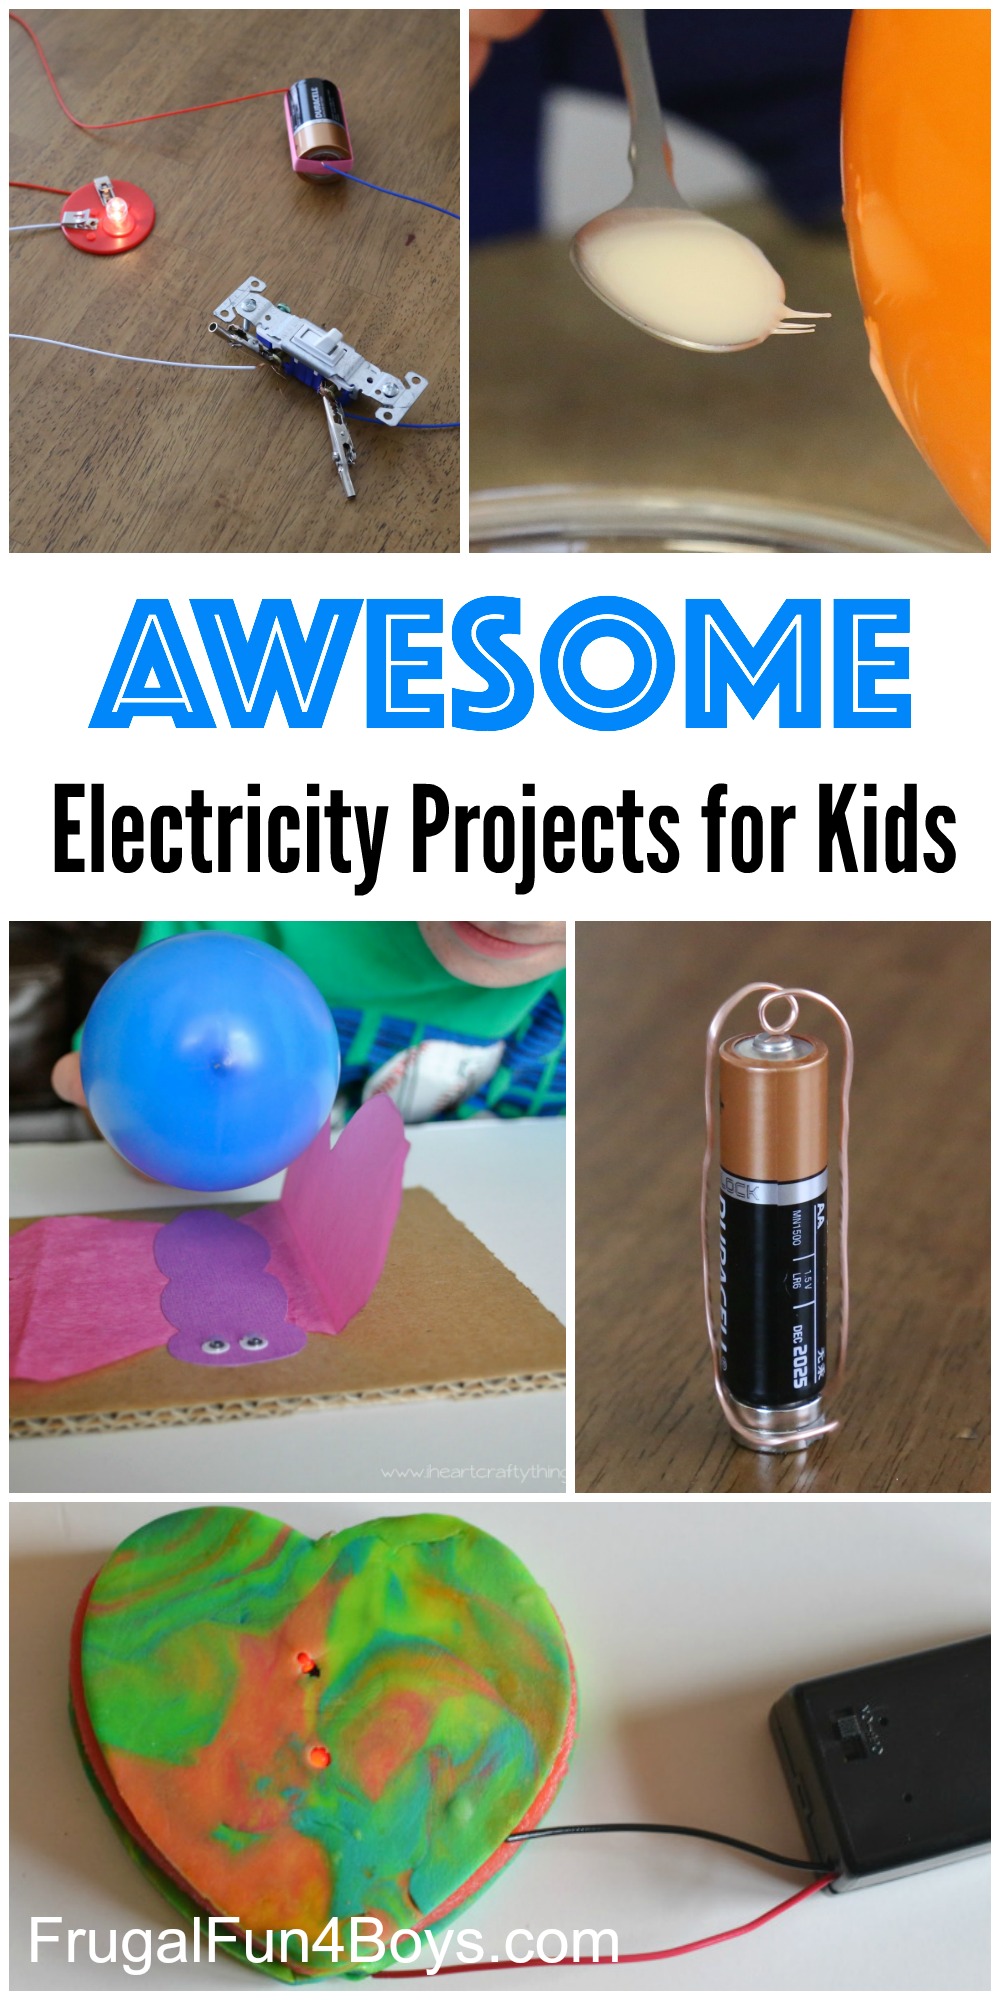 Awesome Electricity Projects for Kids! Science experiments and demonstrations with circuits and more.